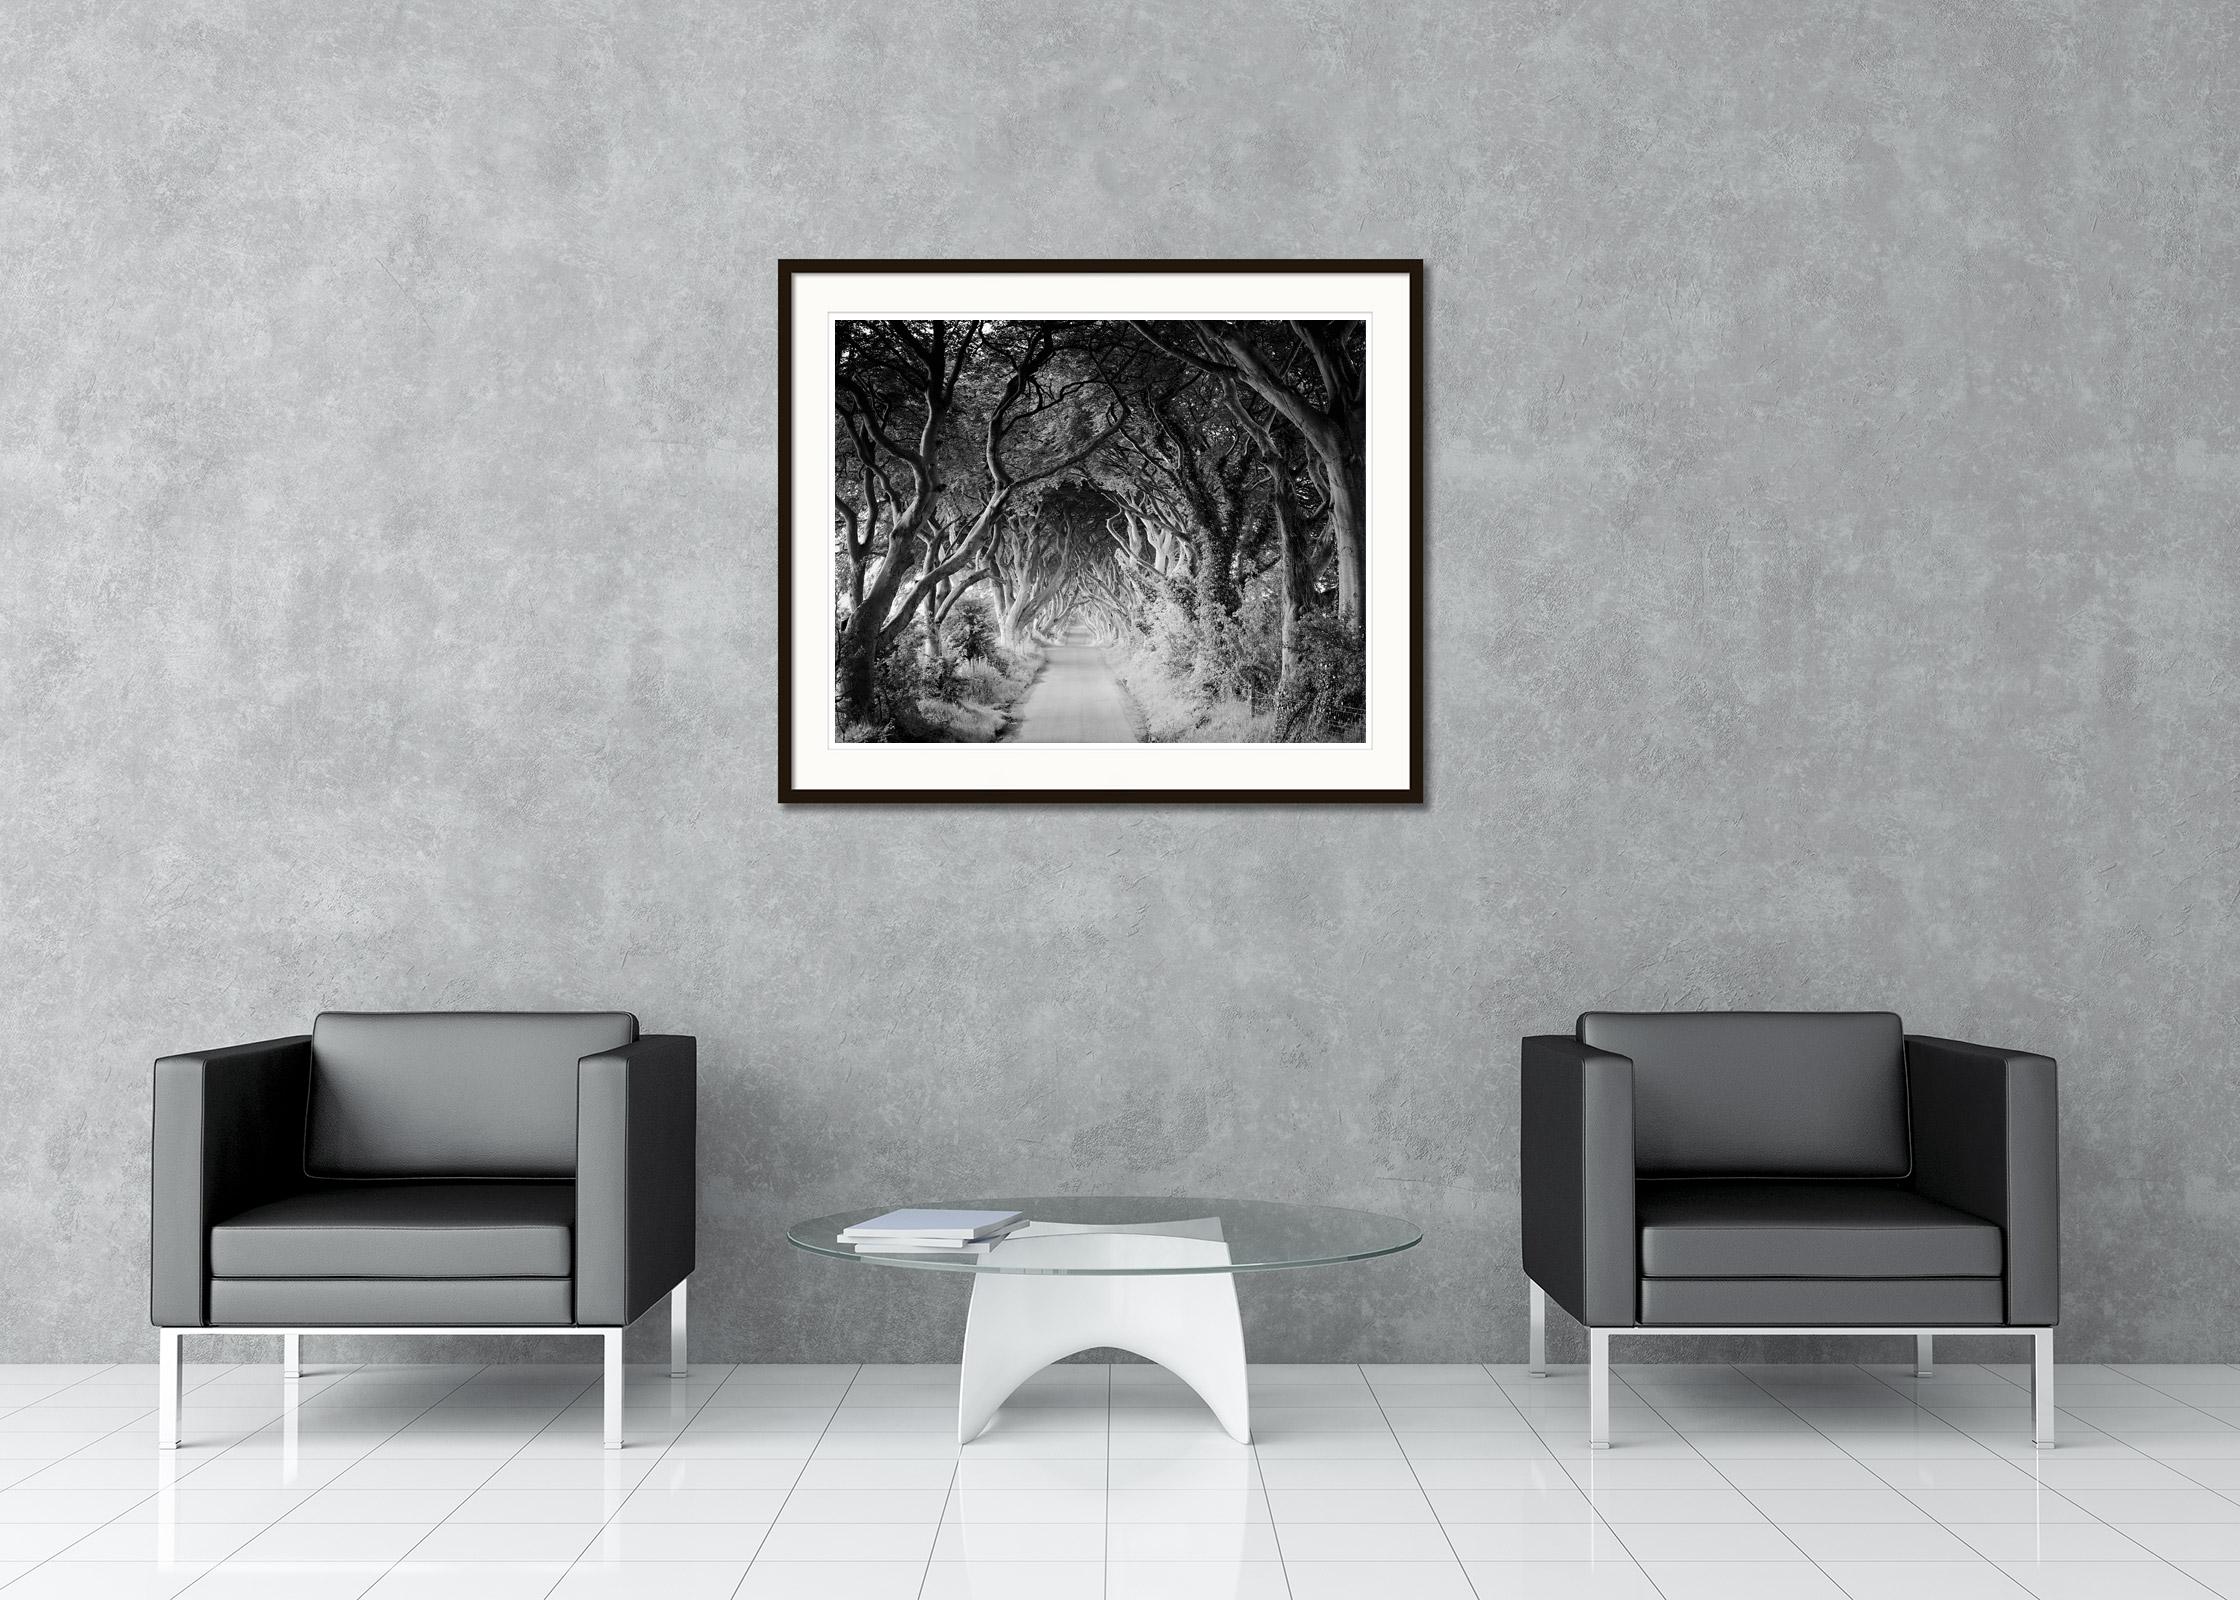 Black and White Fine Art Landscape Photography. The Dark Hedges, unique beech tree avenue in Northern Ireland, film scene from games of thrones. Archival pigment ink print, edition of 20. Signed, titled, dated and numbered by artist. Certificate of